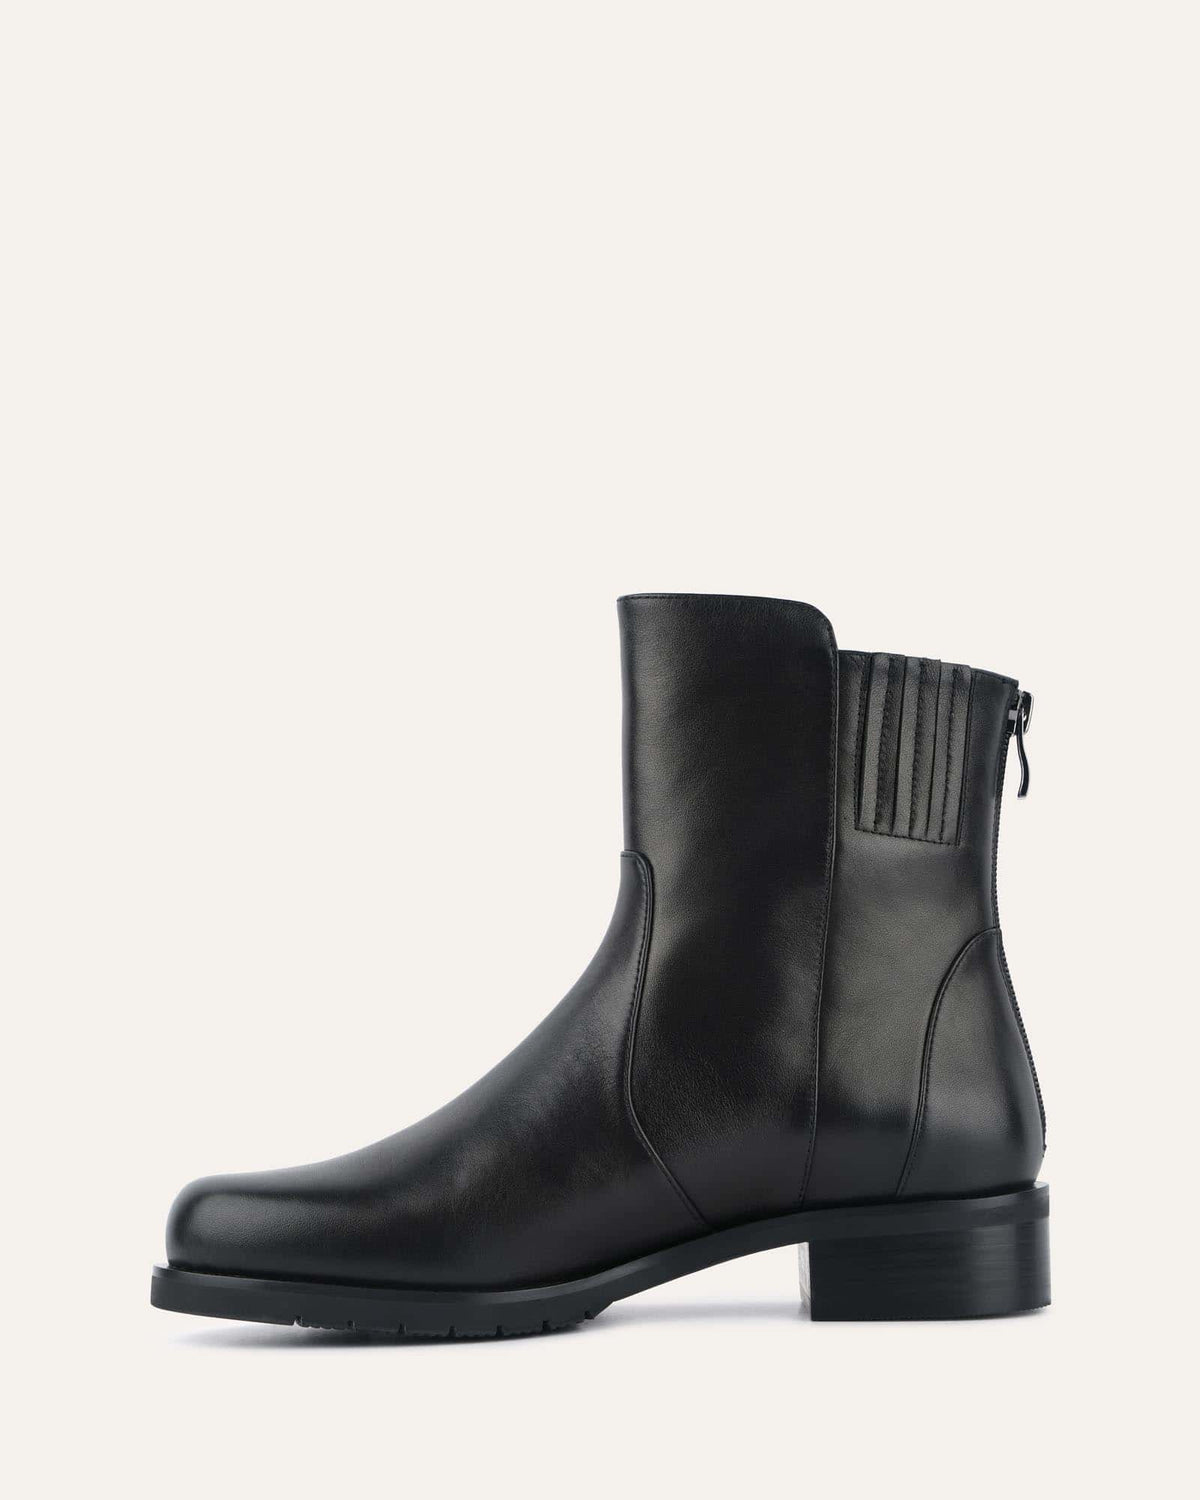 JOHNSTON FLAT ANKLE BOOTS BLACK LEATHER